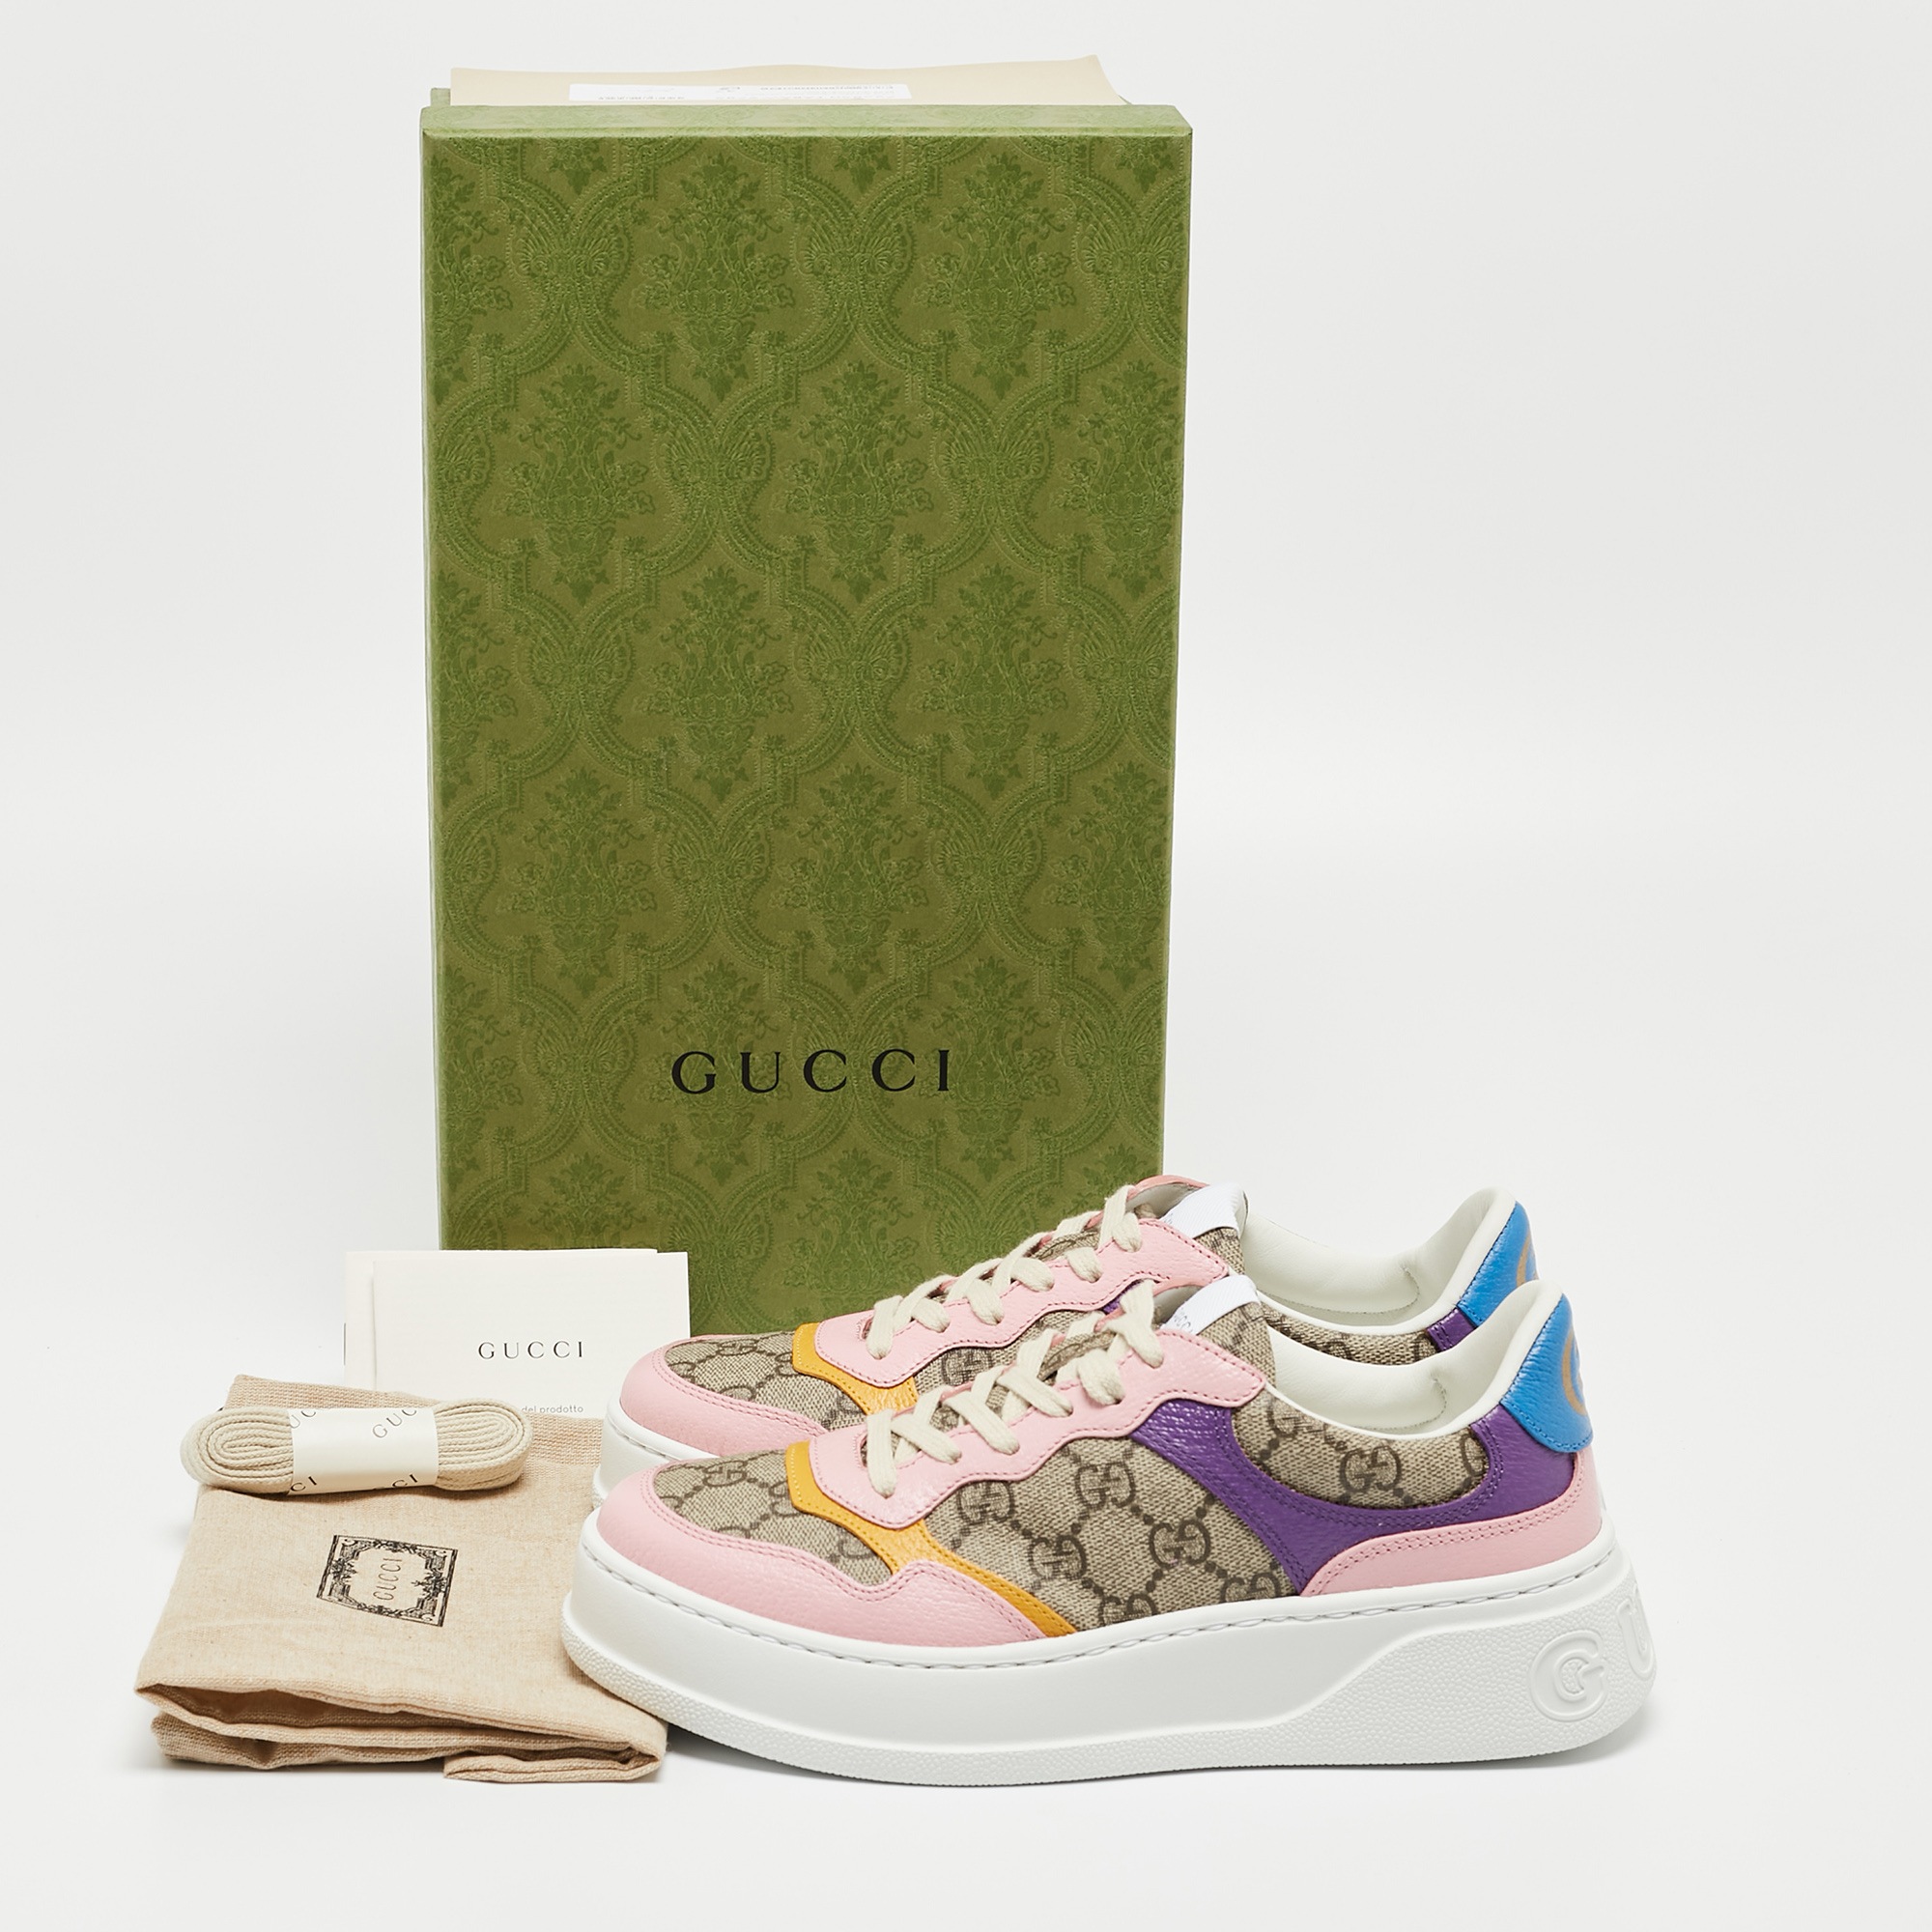 Gucci Multicolor GG Supreme Canvas And Leather Colorblock Low Top Sneakers Size 37